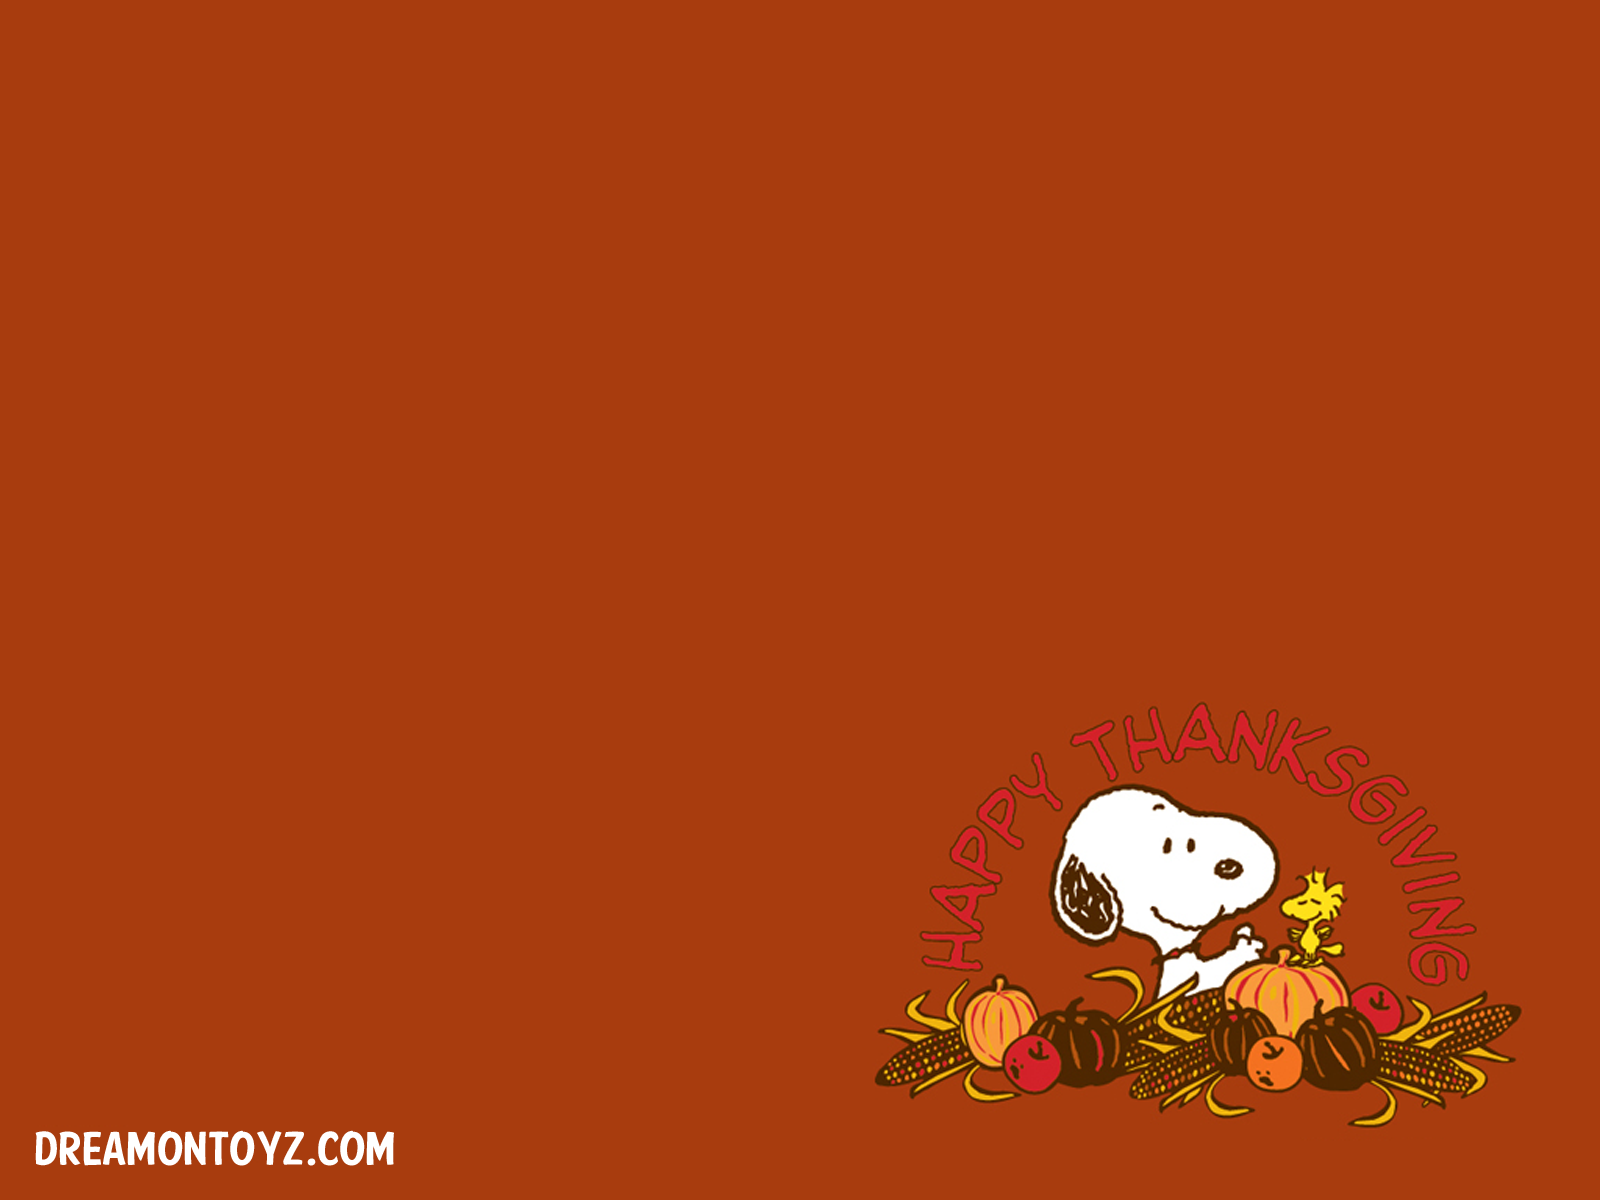 Thanksgiving wallpaper images for that special time of the year